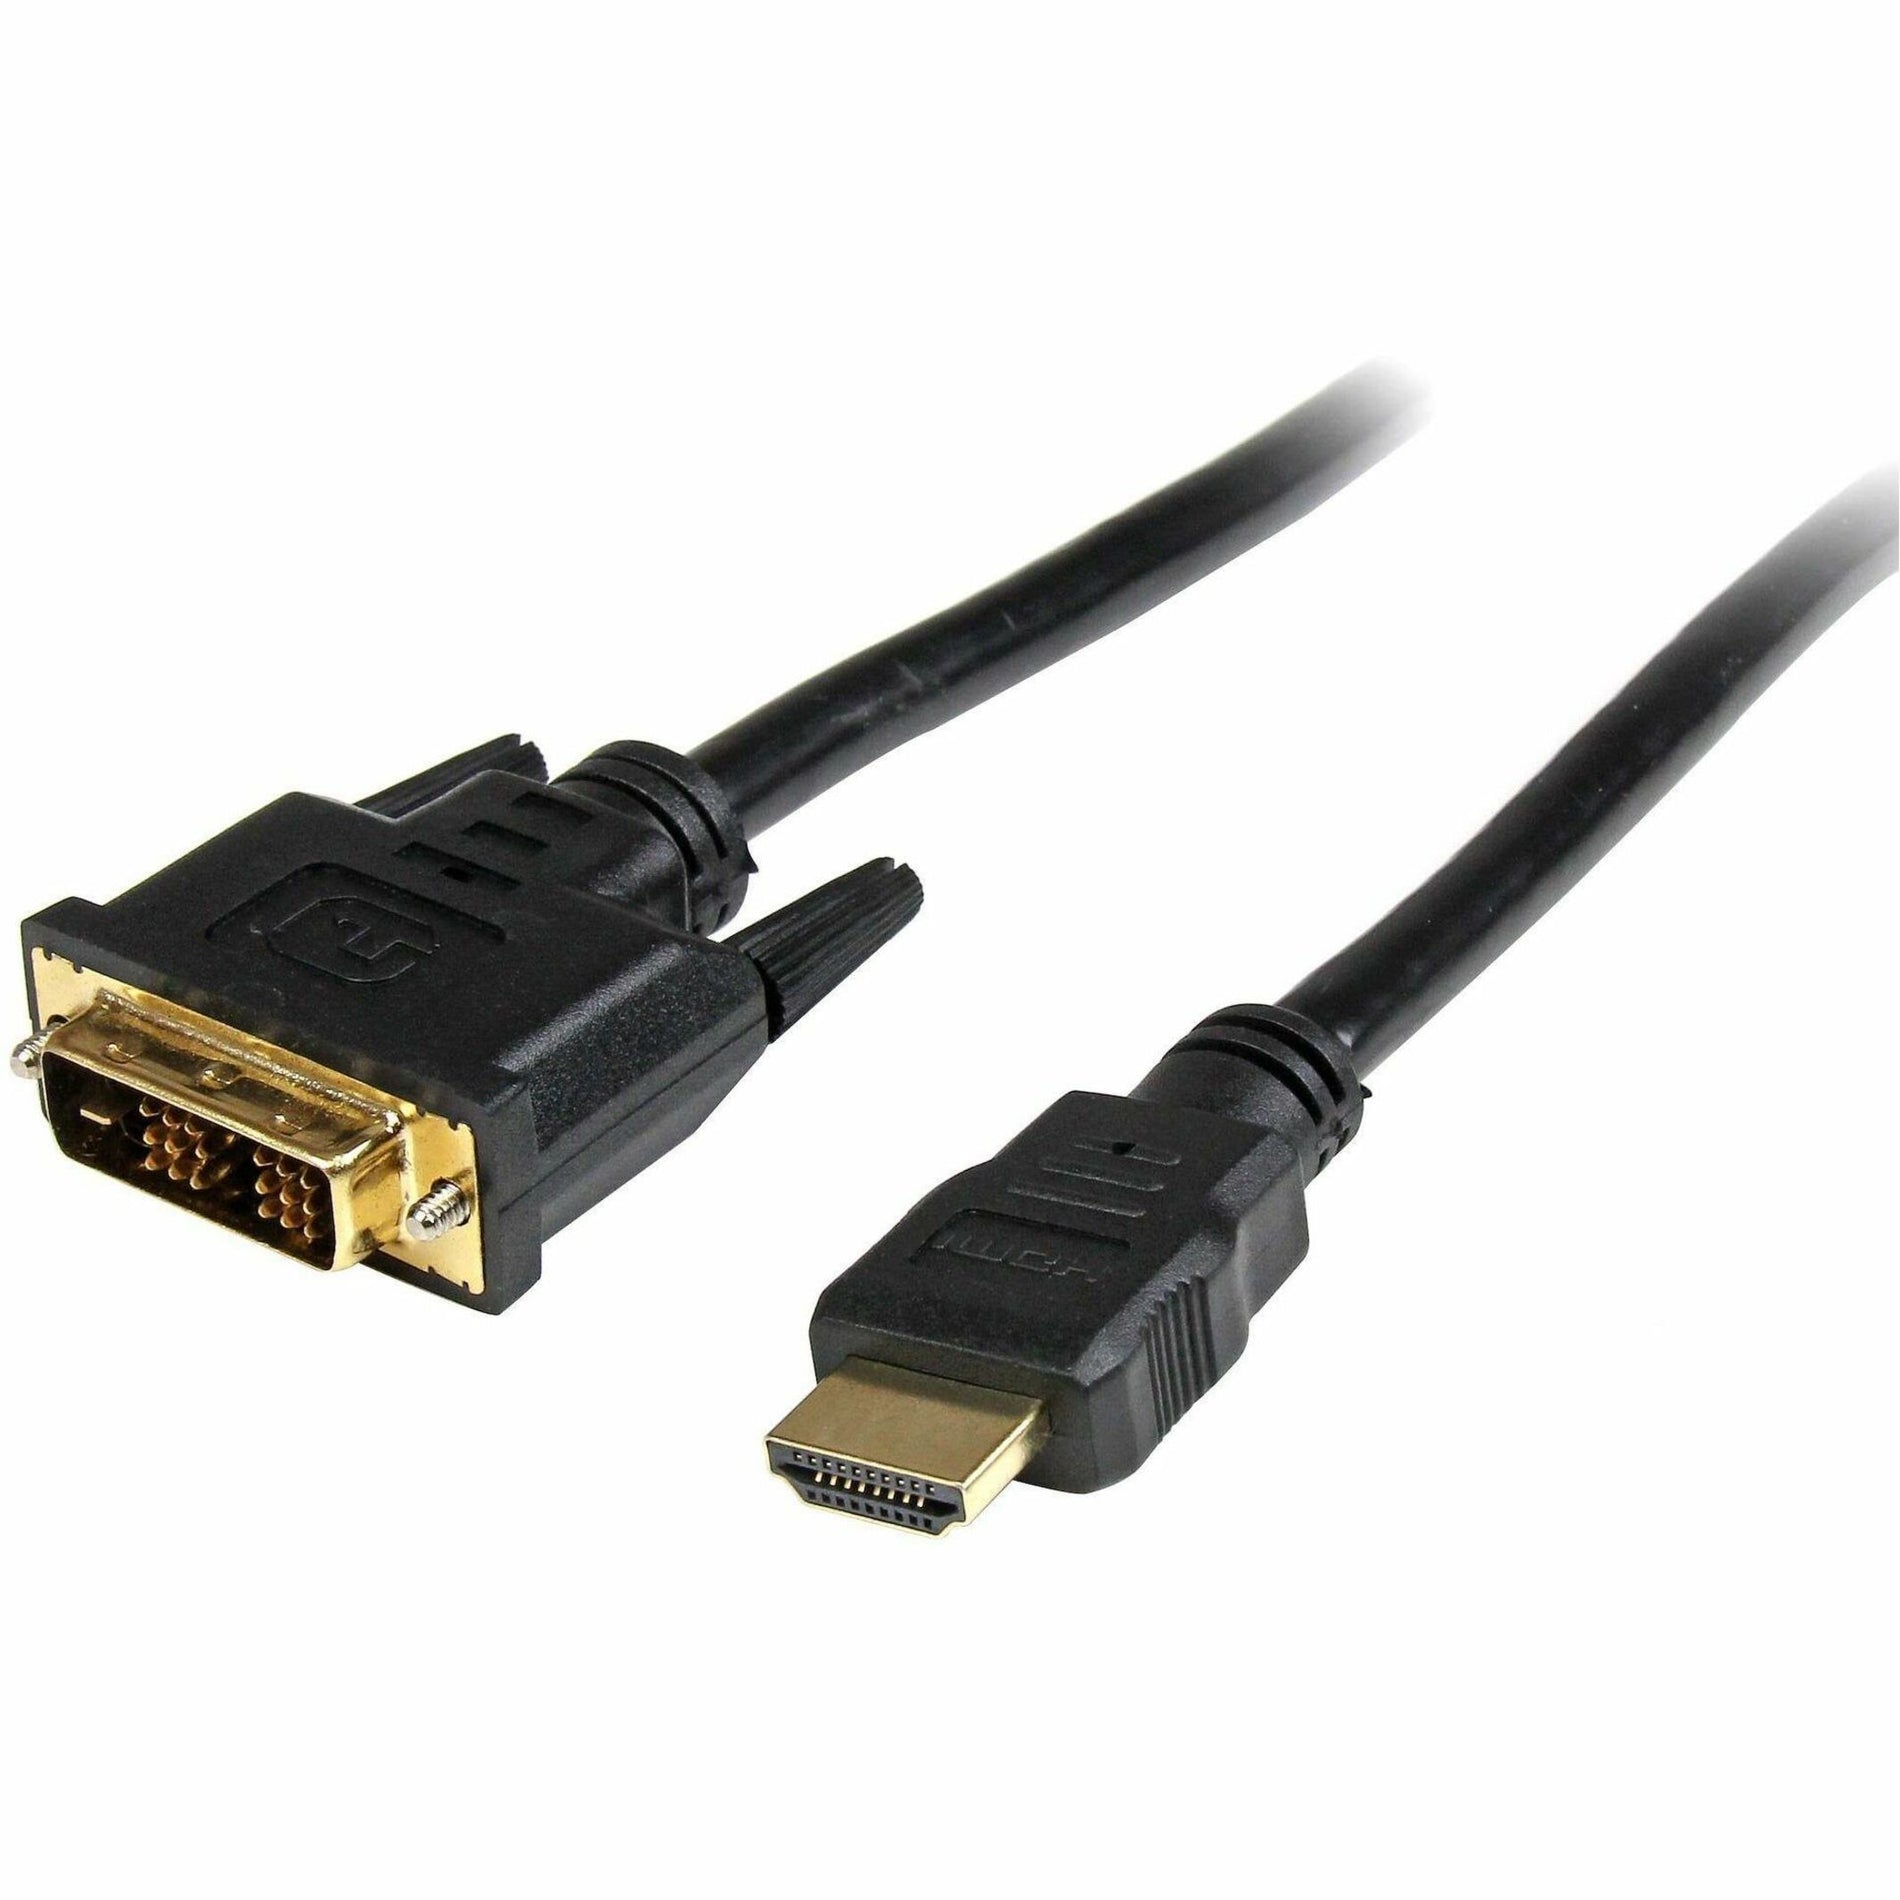 StarTech.com HDDVIMM3 3 ft HDMI to DVI-D Cable - M/M, Molded, Strain Relief, Passive, Copper Conductor, Gold Plated Connectors